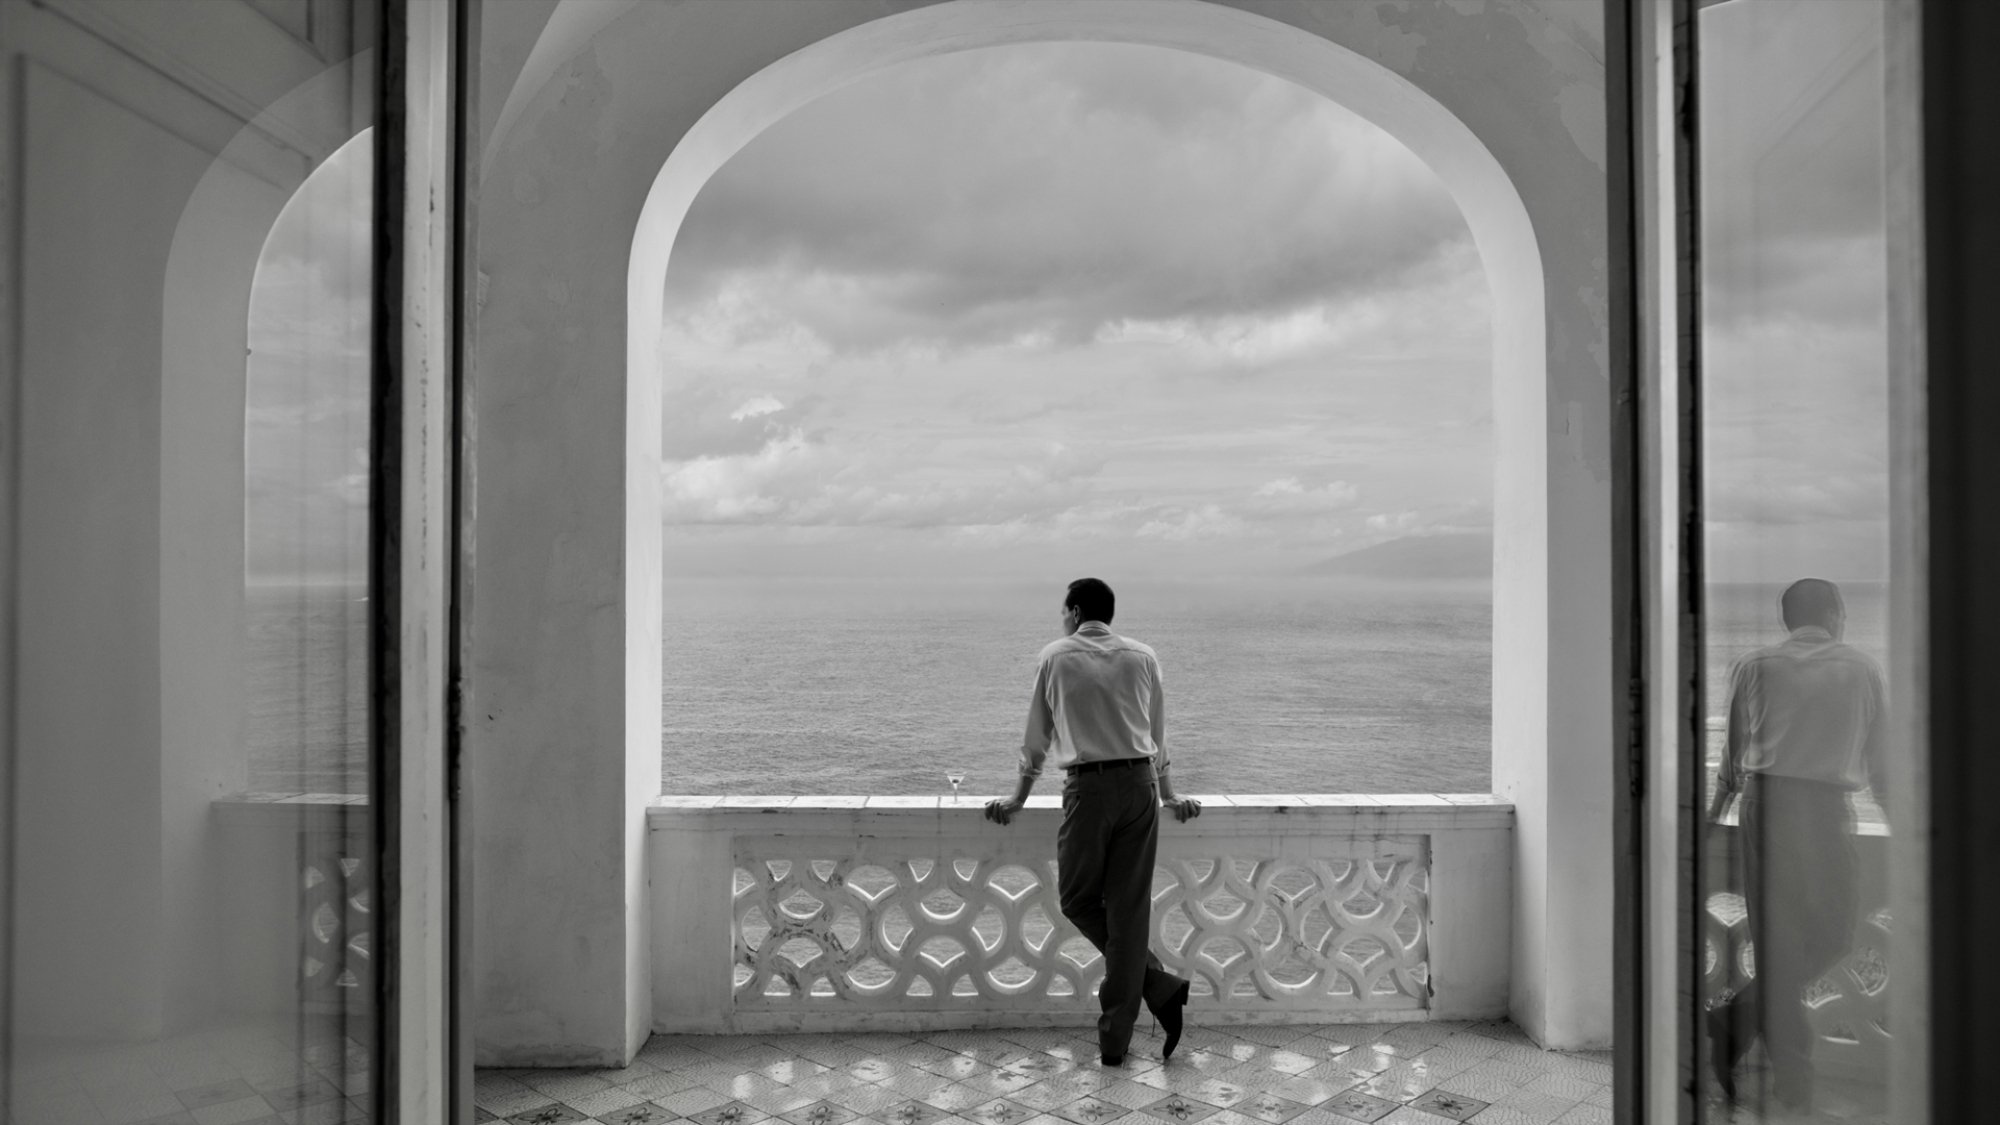 A man stands on a balcony overlooking the sea.